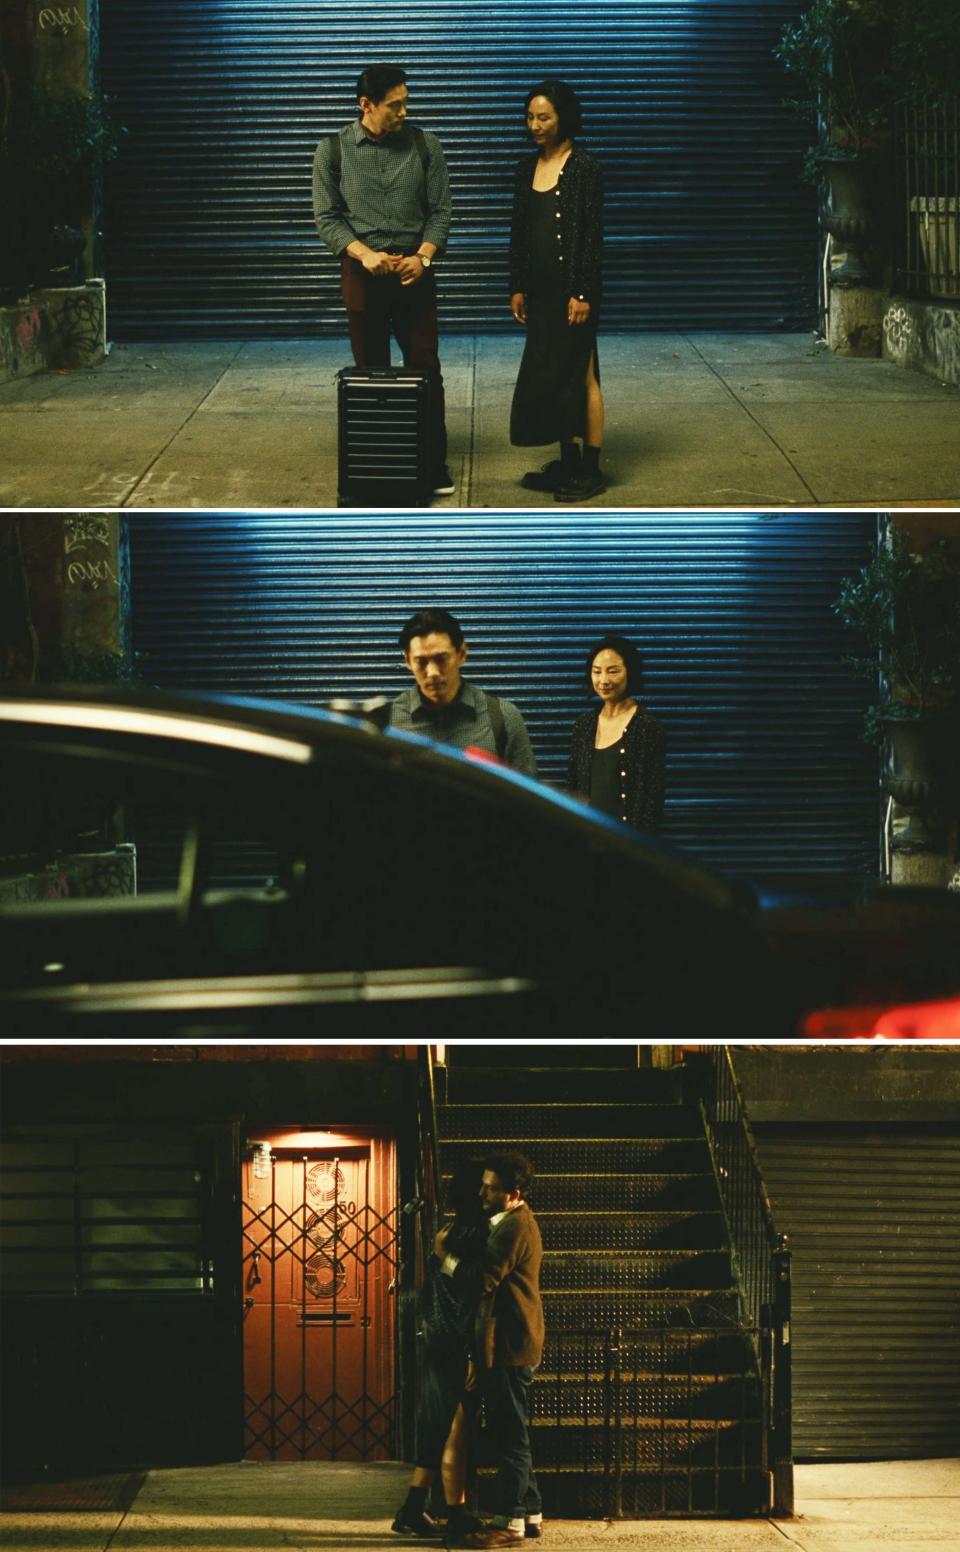 Screenshots from "Past Lives"